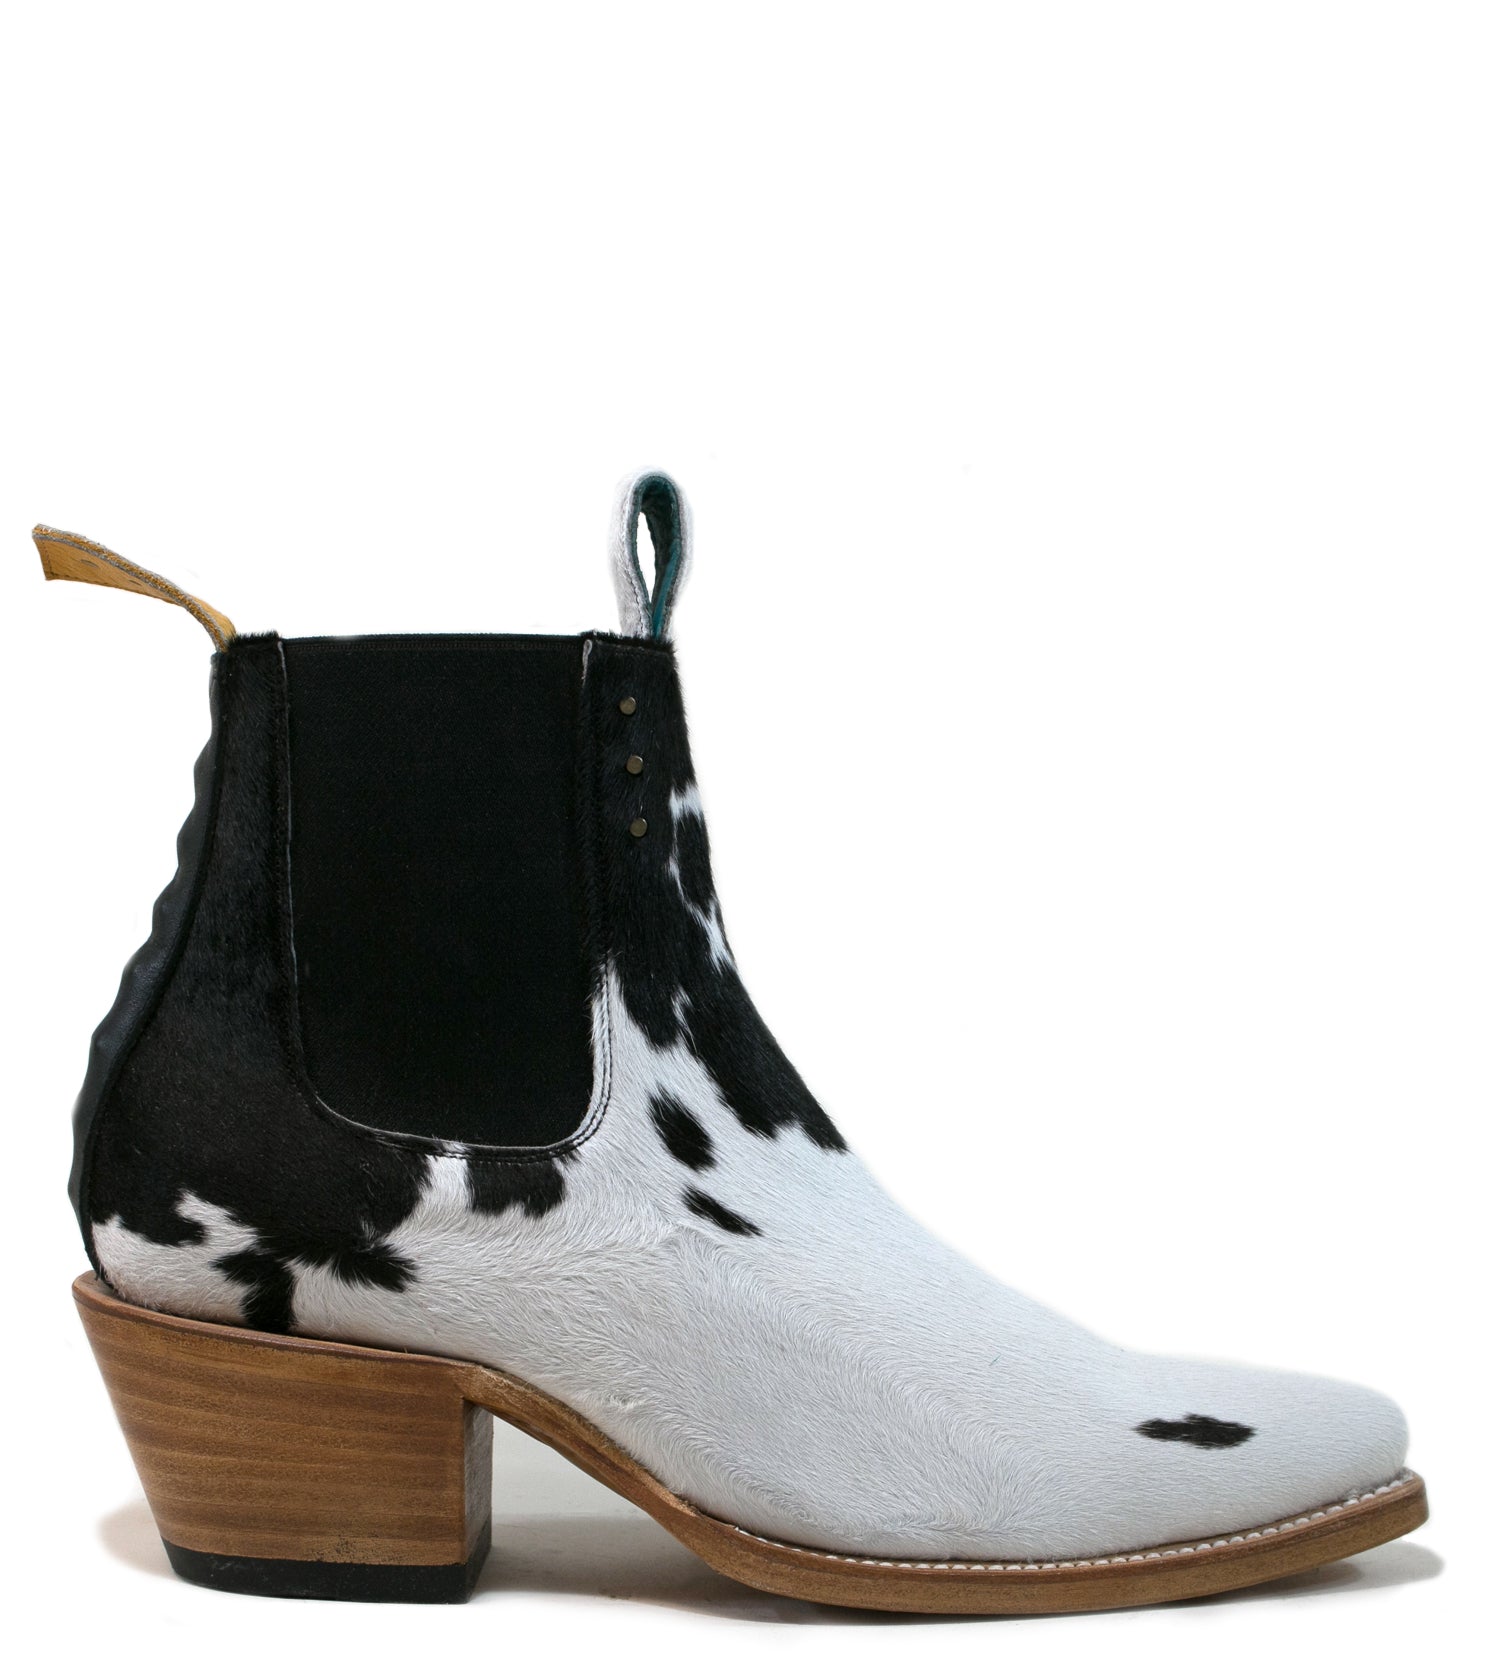 white and black chelsea boots